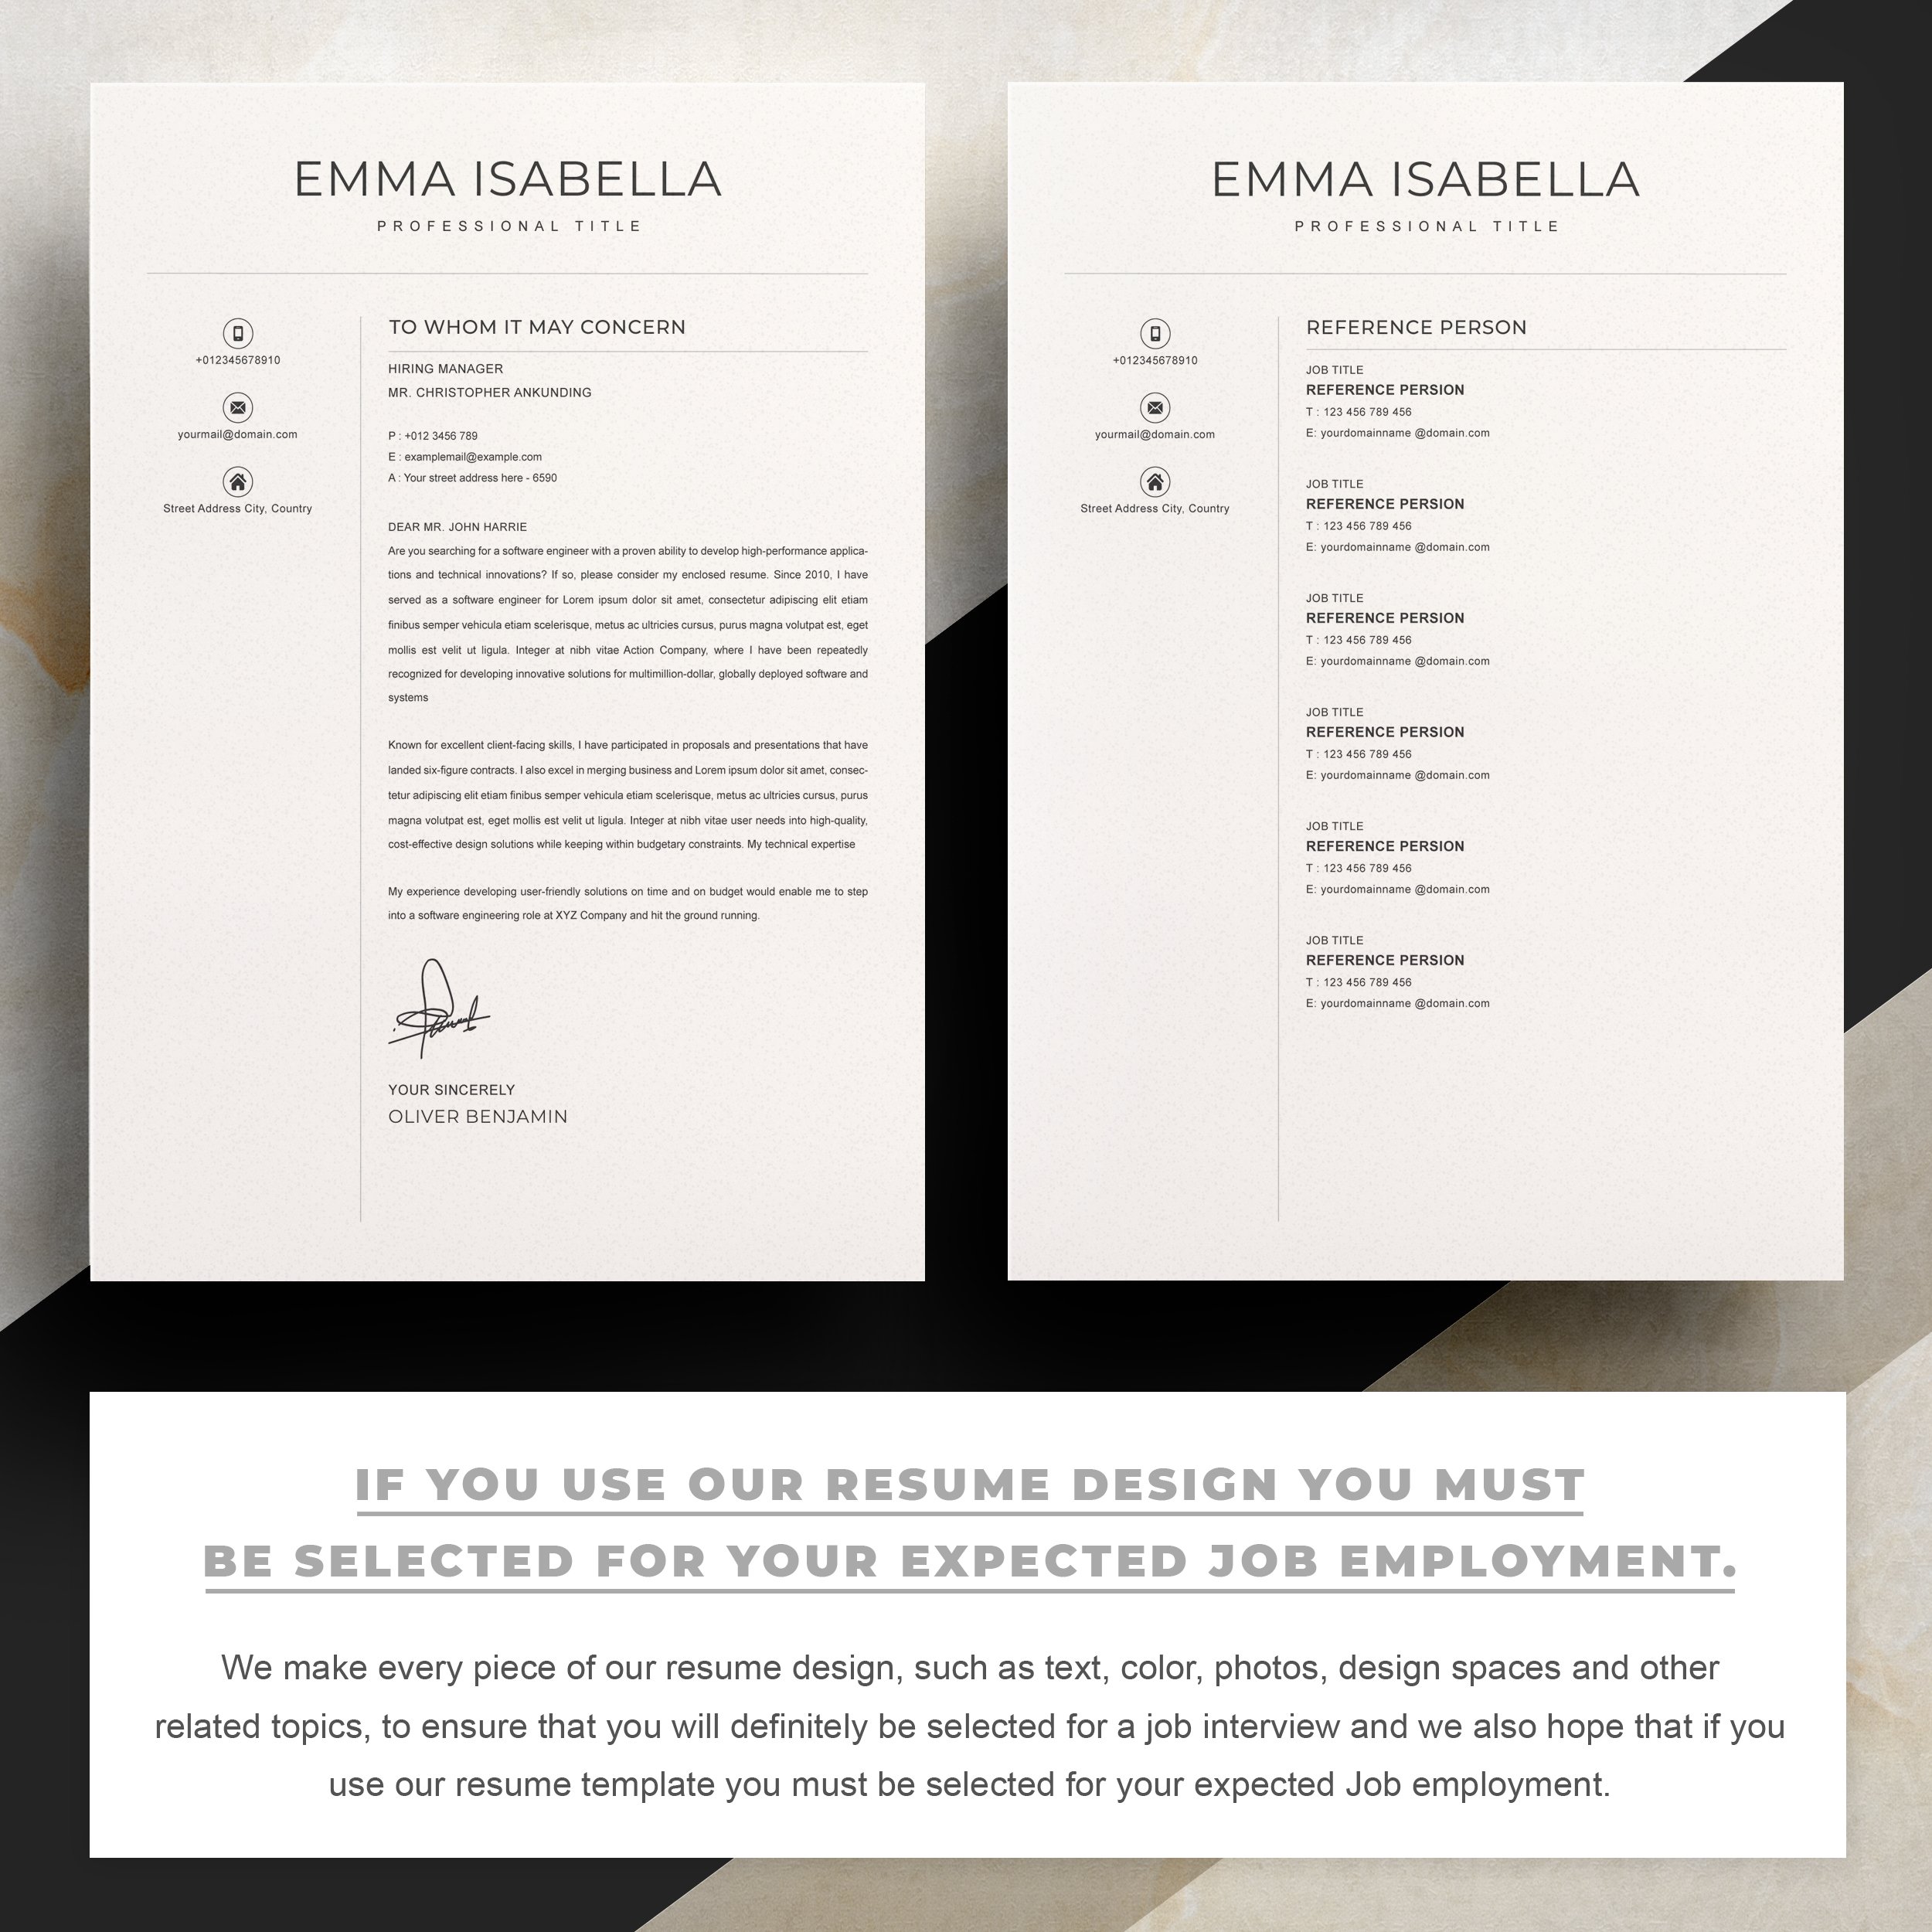 03 2 pages free resume design template 154